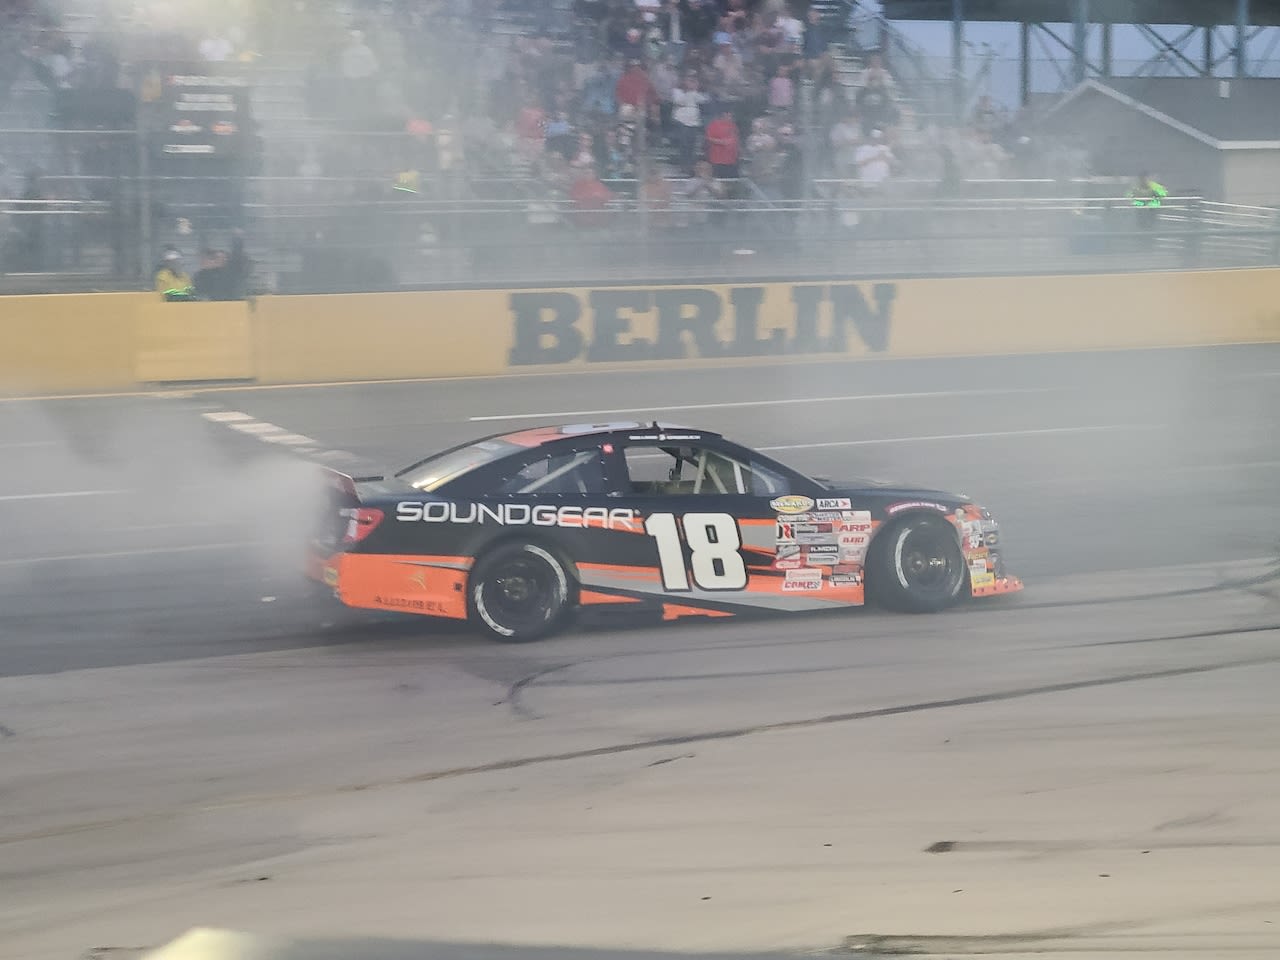 NASCAR’s next stars come to West Michigan to battle it out in the Berlin ARCA 200